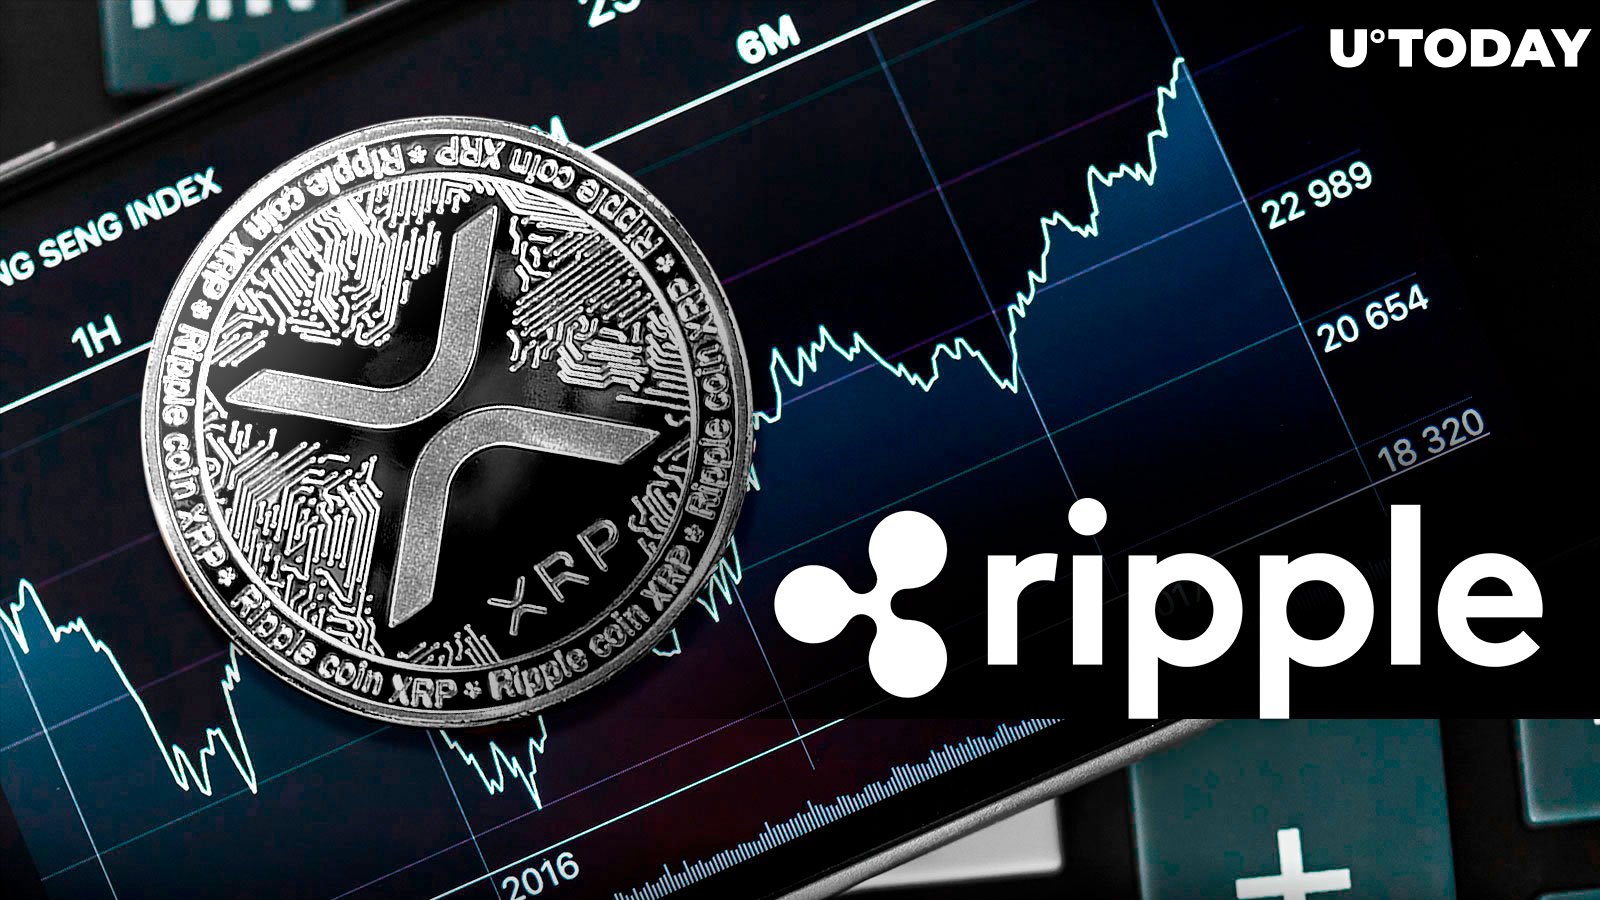 Ripple transfers 50 million XRP tokens: what's happening?